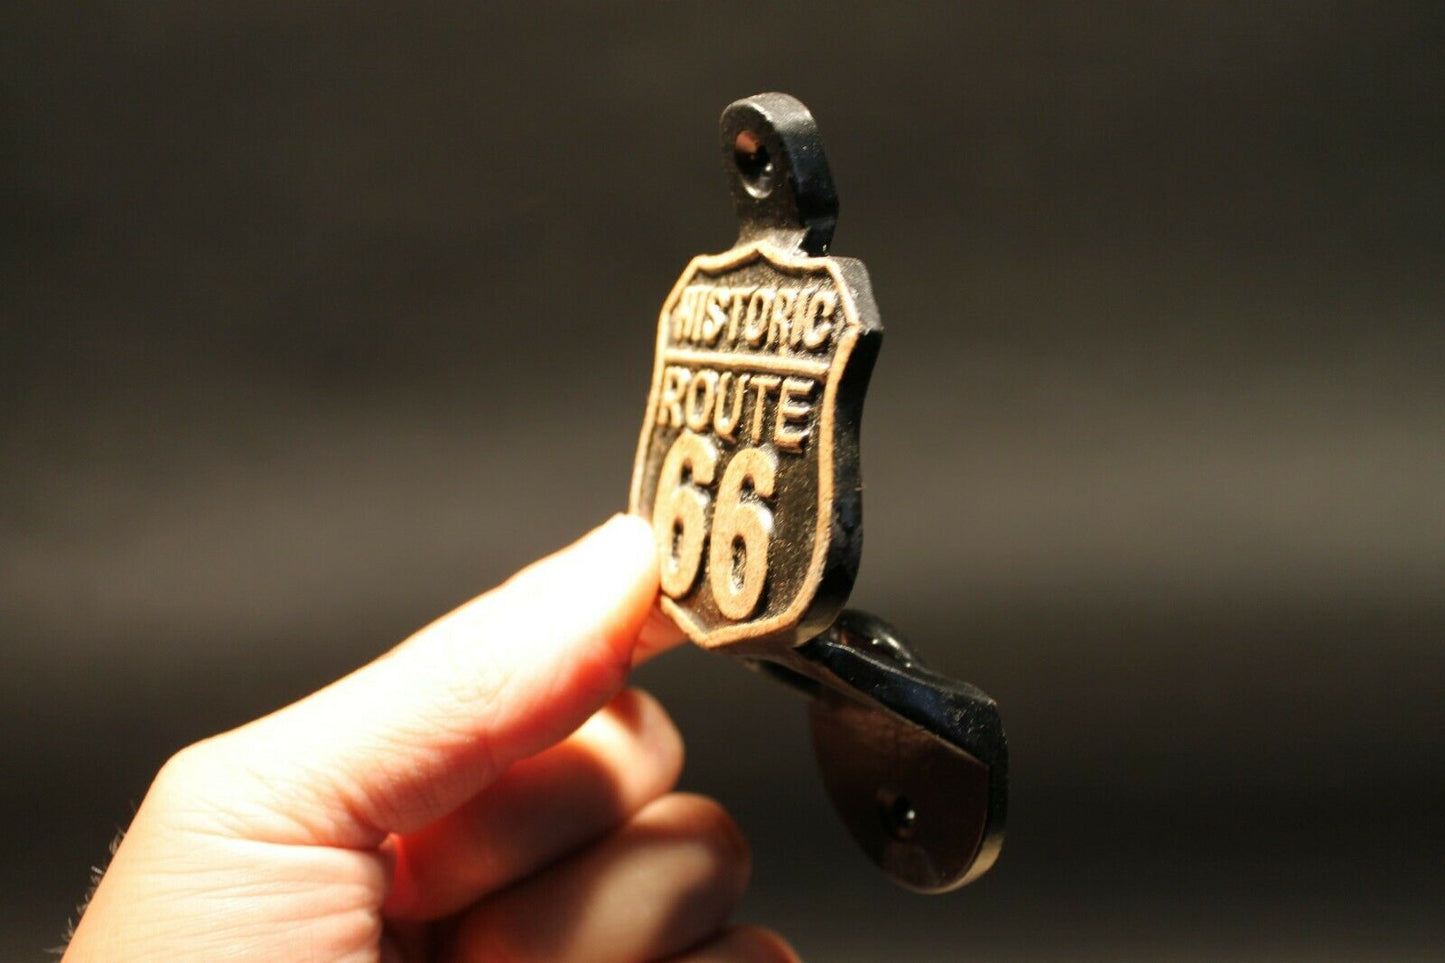 Antique Vintage Style Cast Iron Wall Mount Route 66 Bottle Cap Opener - Early Home Decor